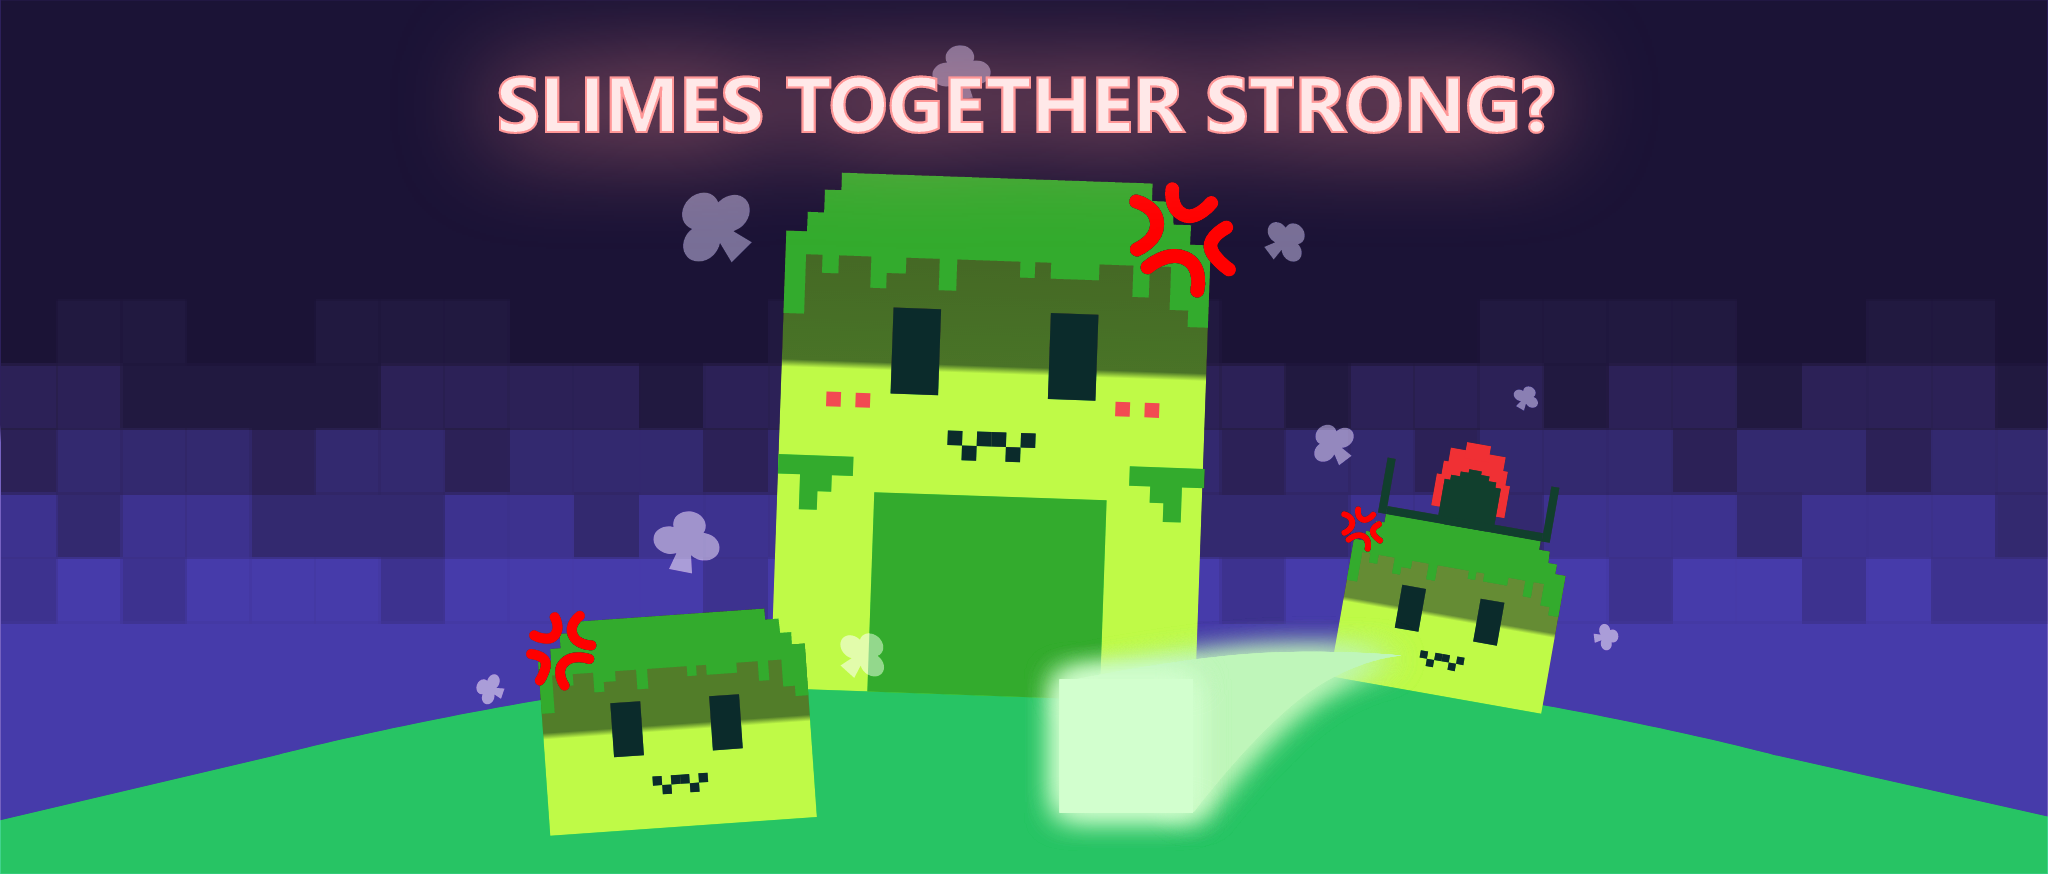 Slimes Together Strong?